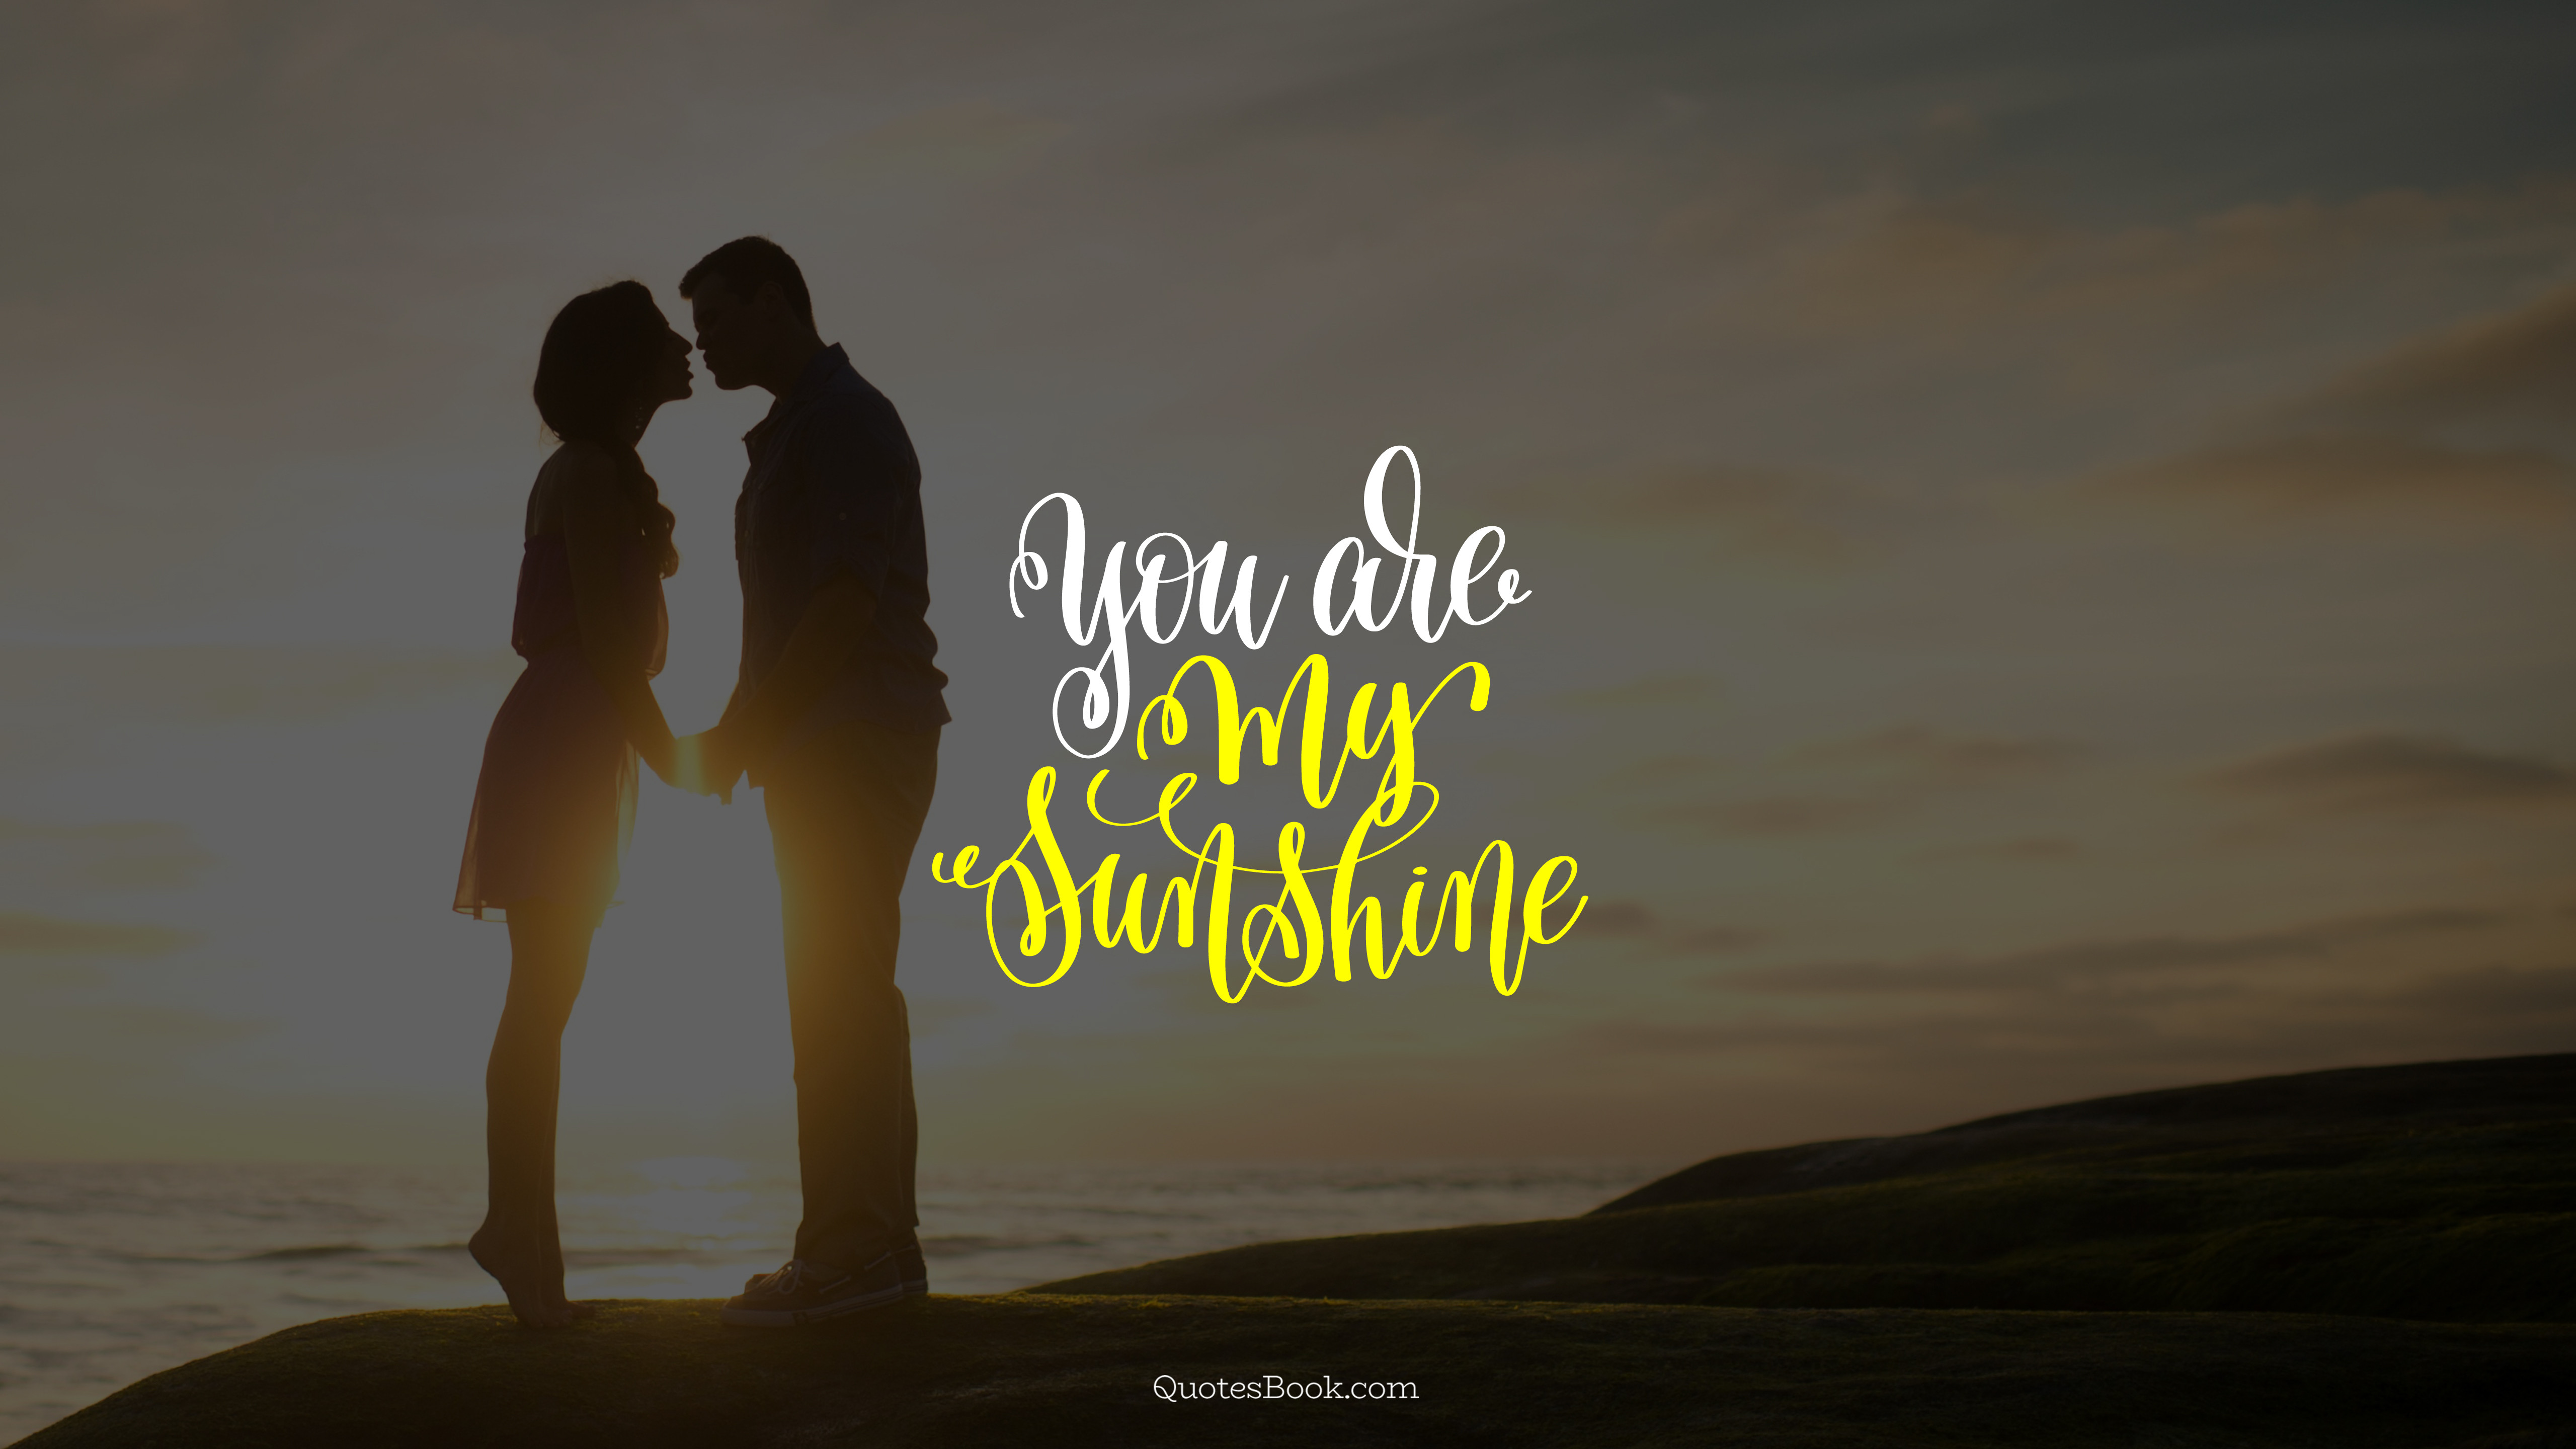 you are my sunshine 5120x2880 4052